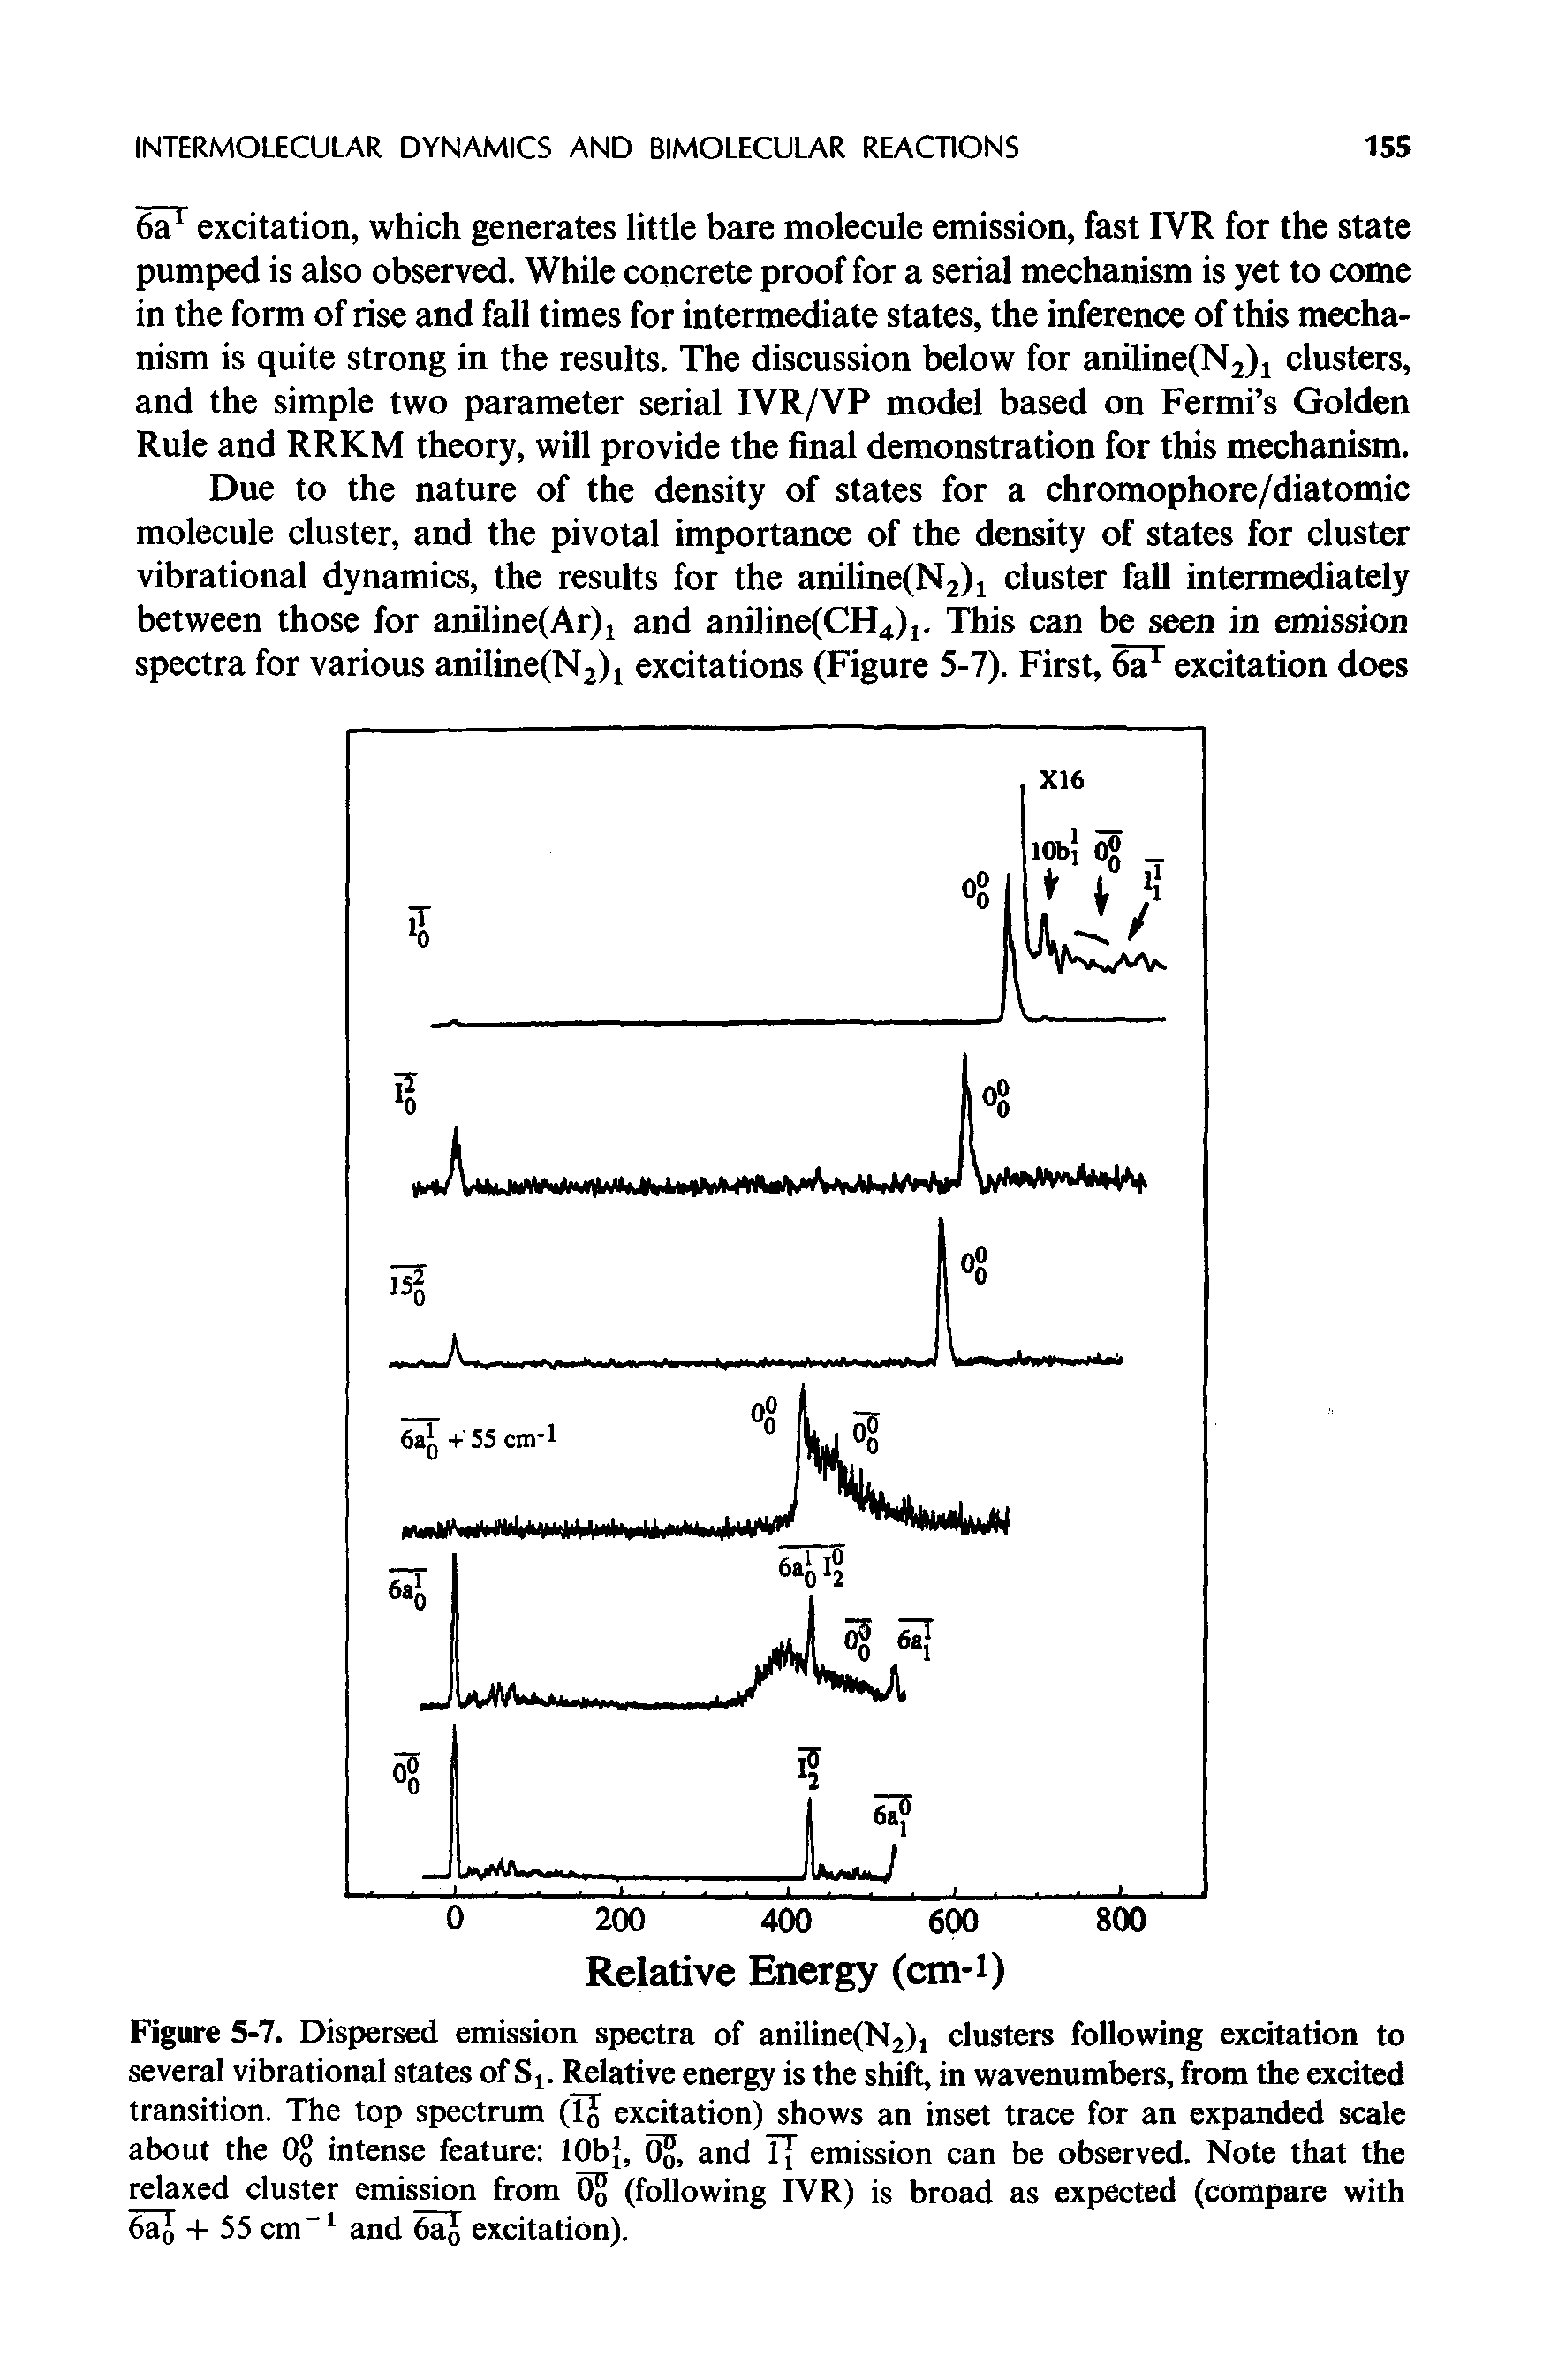 Figure 5-7. Dispersed emission spectra of aniline(N2)i clusters following excitation to several vibrational states of St. Relative energy is the shift, in wavenumbers, from the excited transition. The top spectrum (TJ excitation) shows an inset trace for an expanded scale about the 0° intense feature 10b, 0 J, and JJ emission can be observed. Note that the relaxed cluster emission from 0 J (following IVR) is broad as expected (compare with 6aJ + 55 cm -1 and 6aJ excitation).